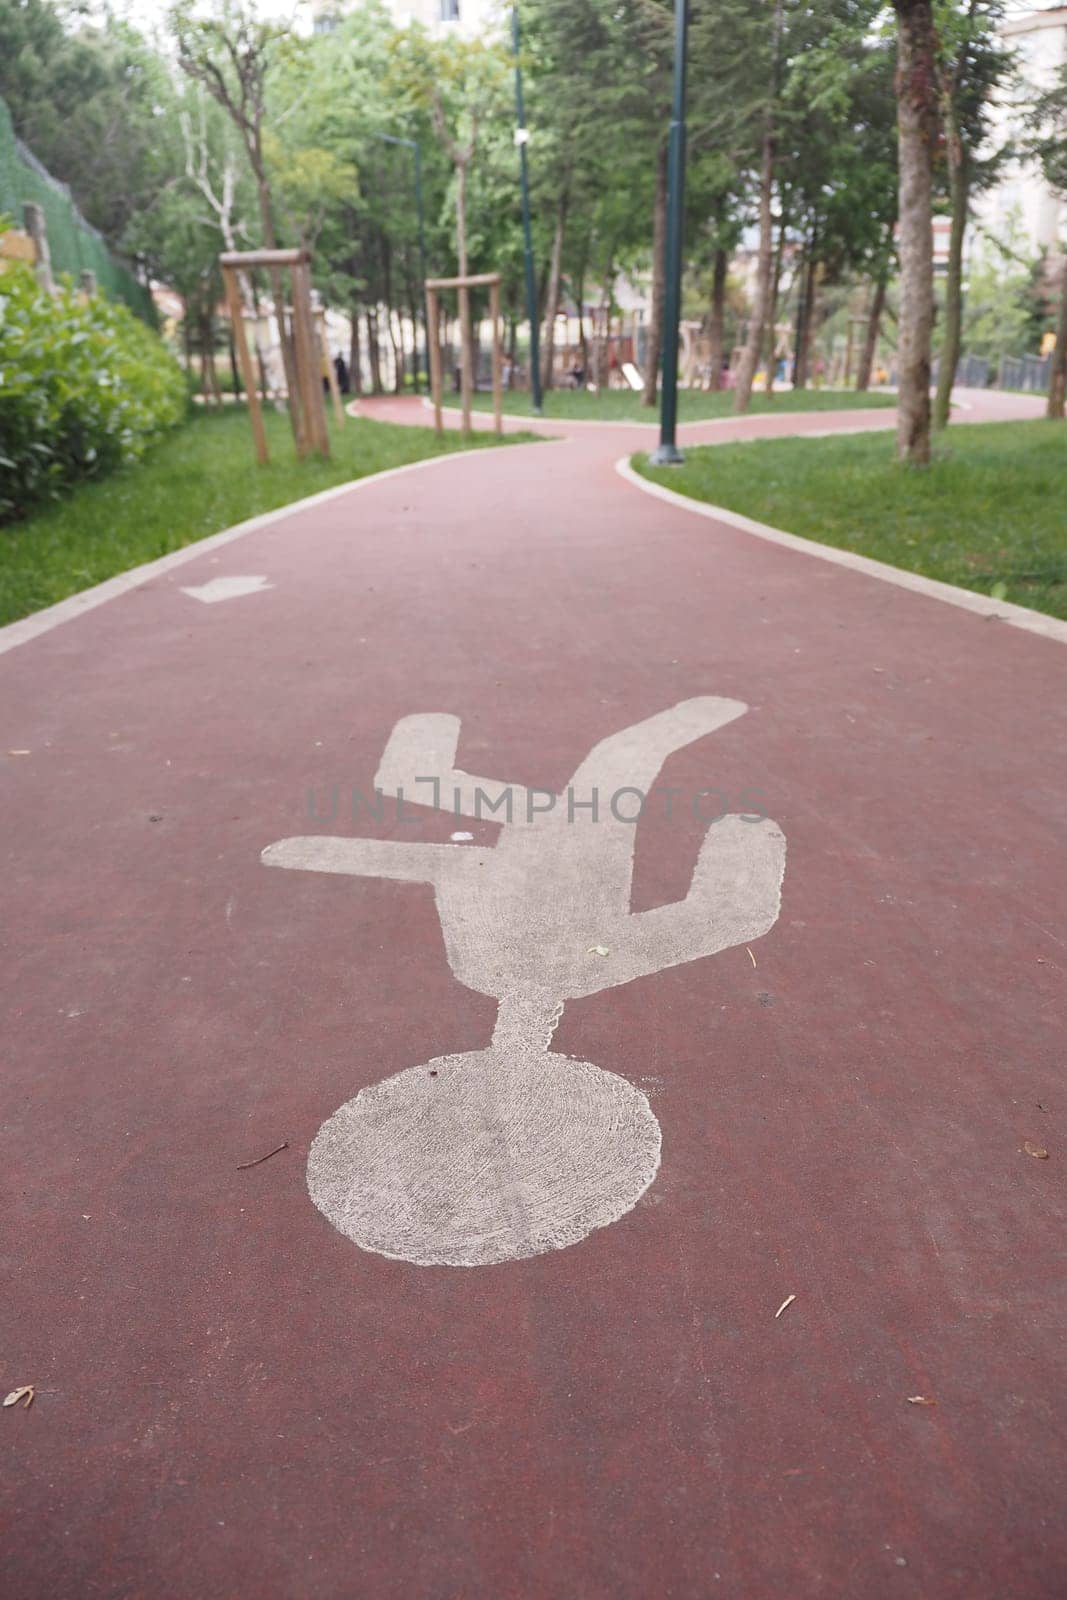 Image of a pedestrian area on a red pavement